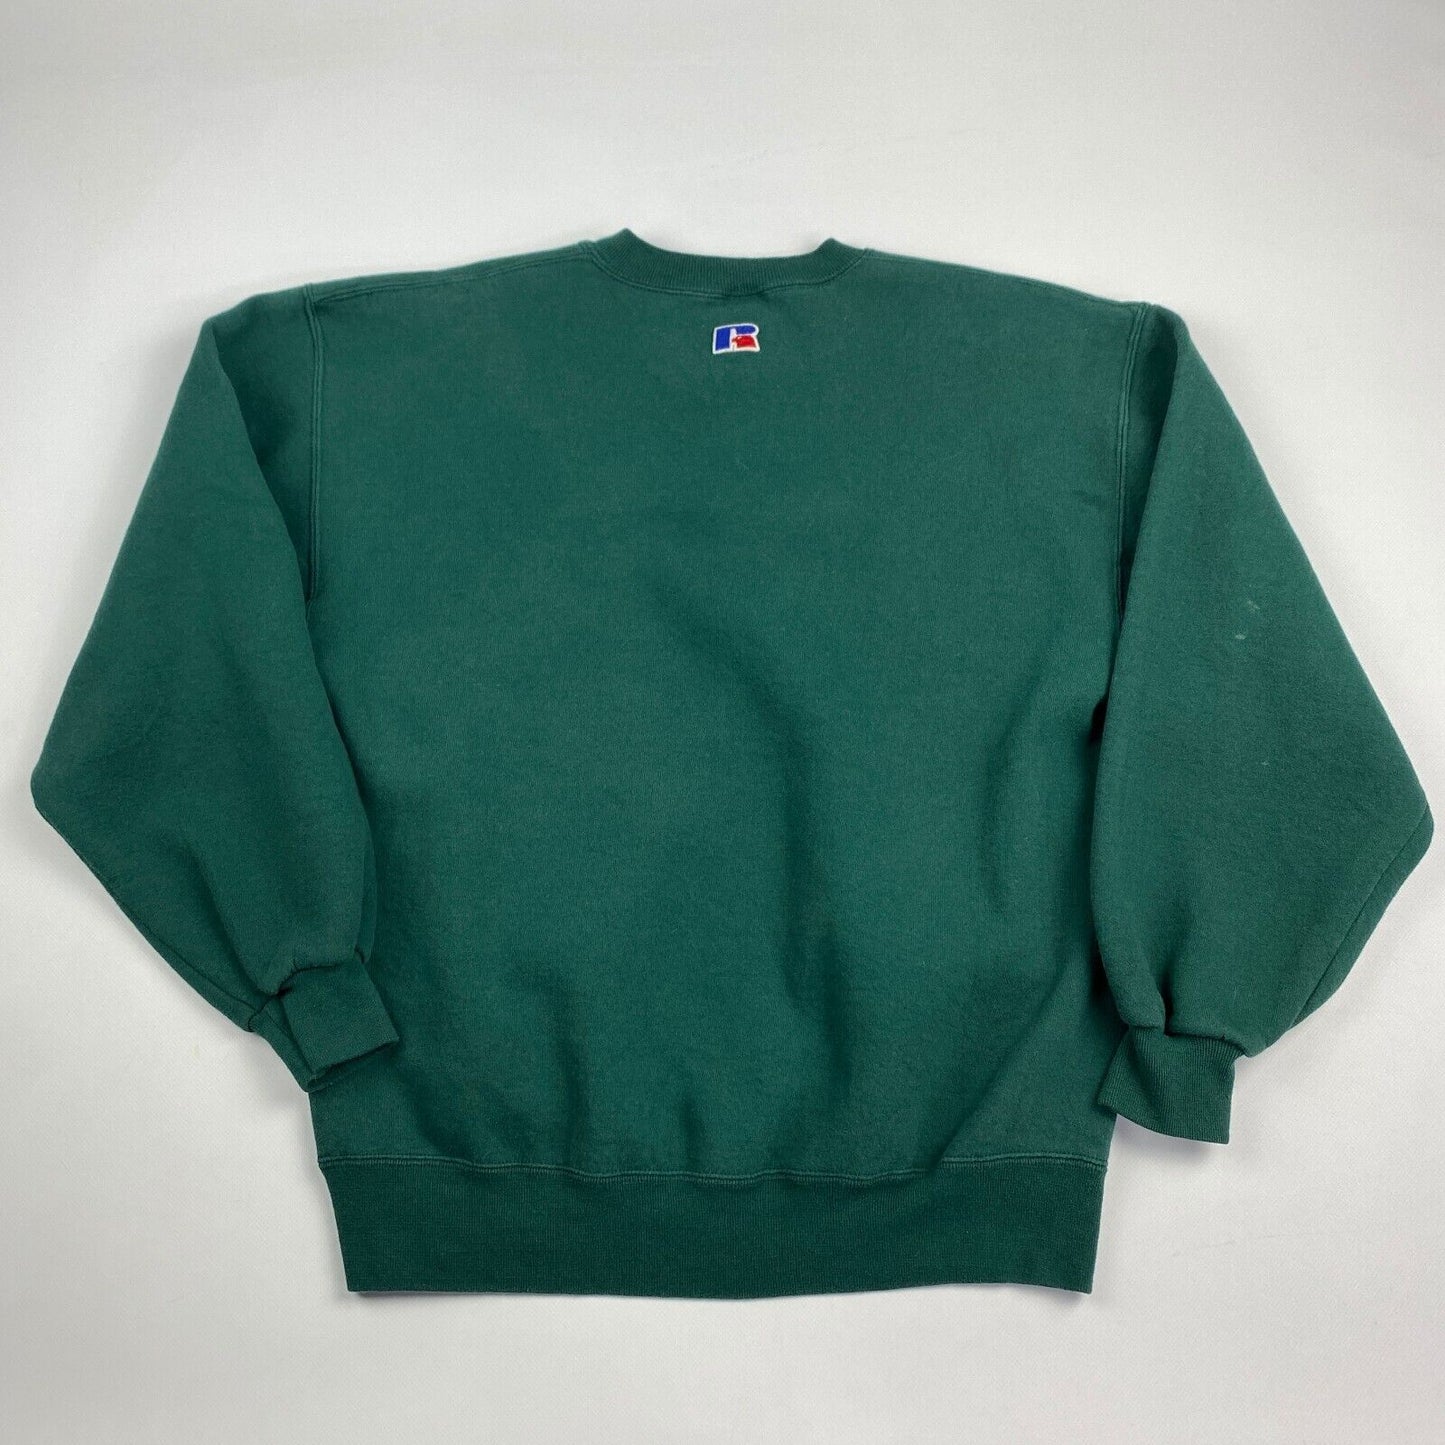 VINTAGE 90s Russell Athletic Blank Green Crewneck Sweater sz Large Men MadeinUSA